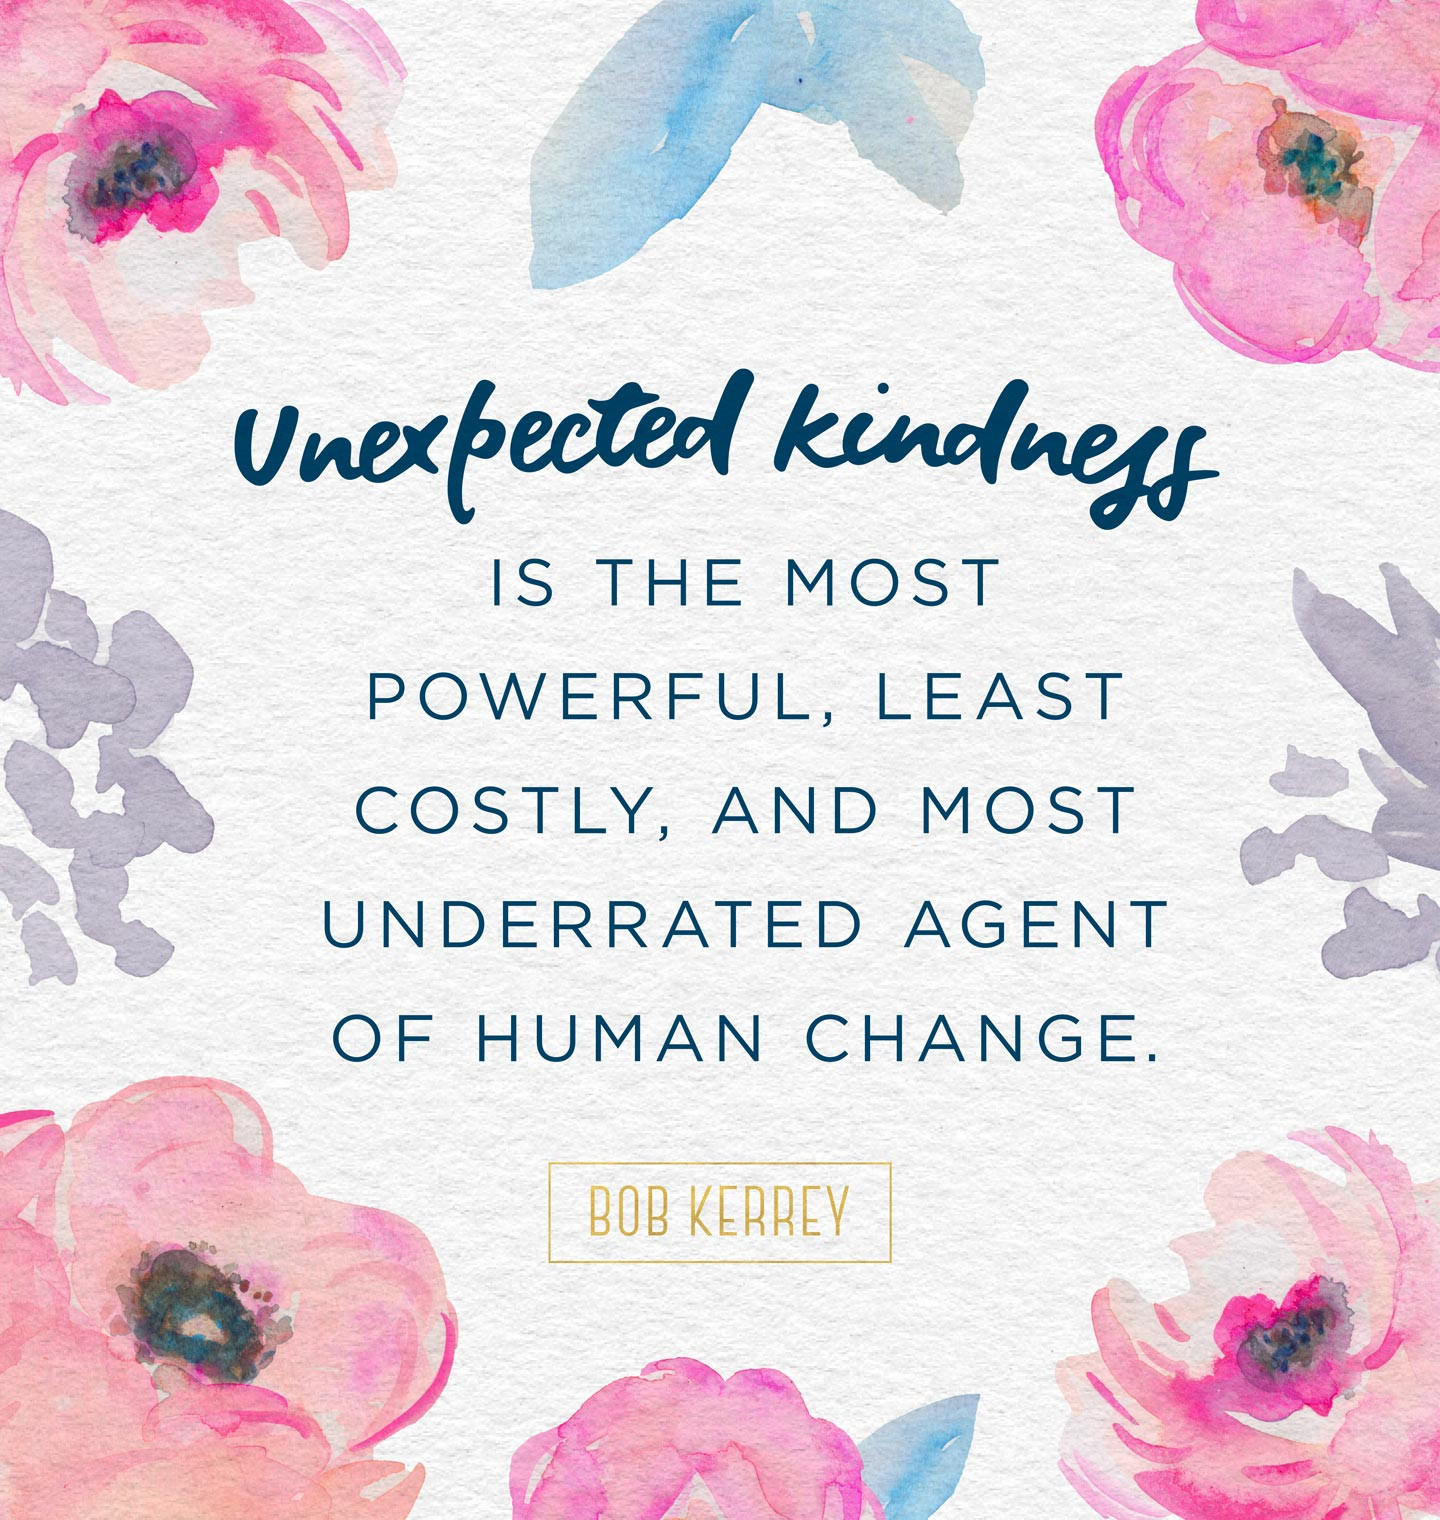 Quote Kindness
 30 Inspiring Kindness Quotes That Will Enlighten You FTD